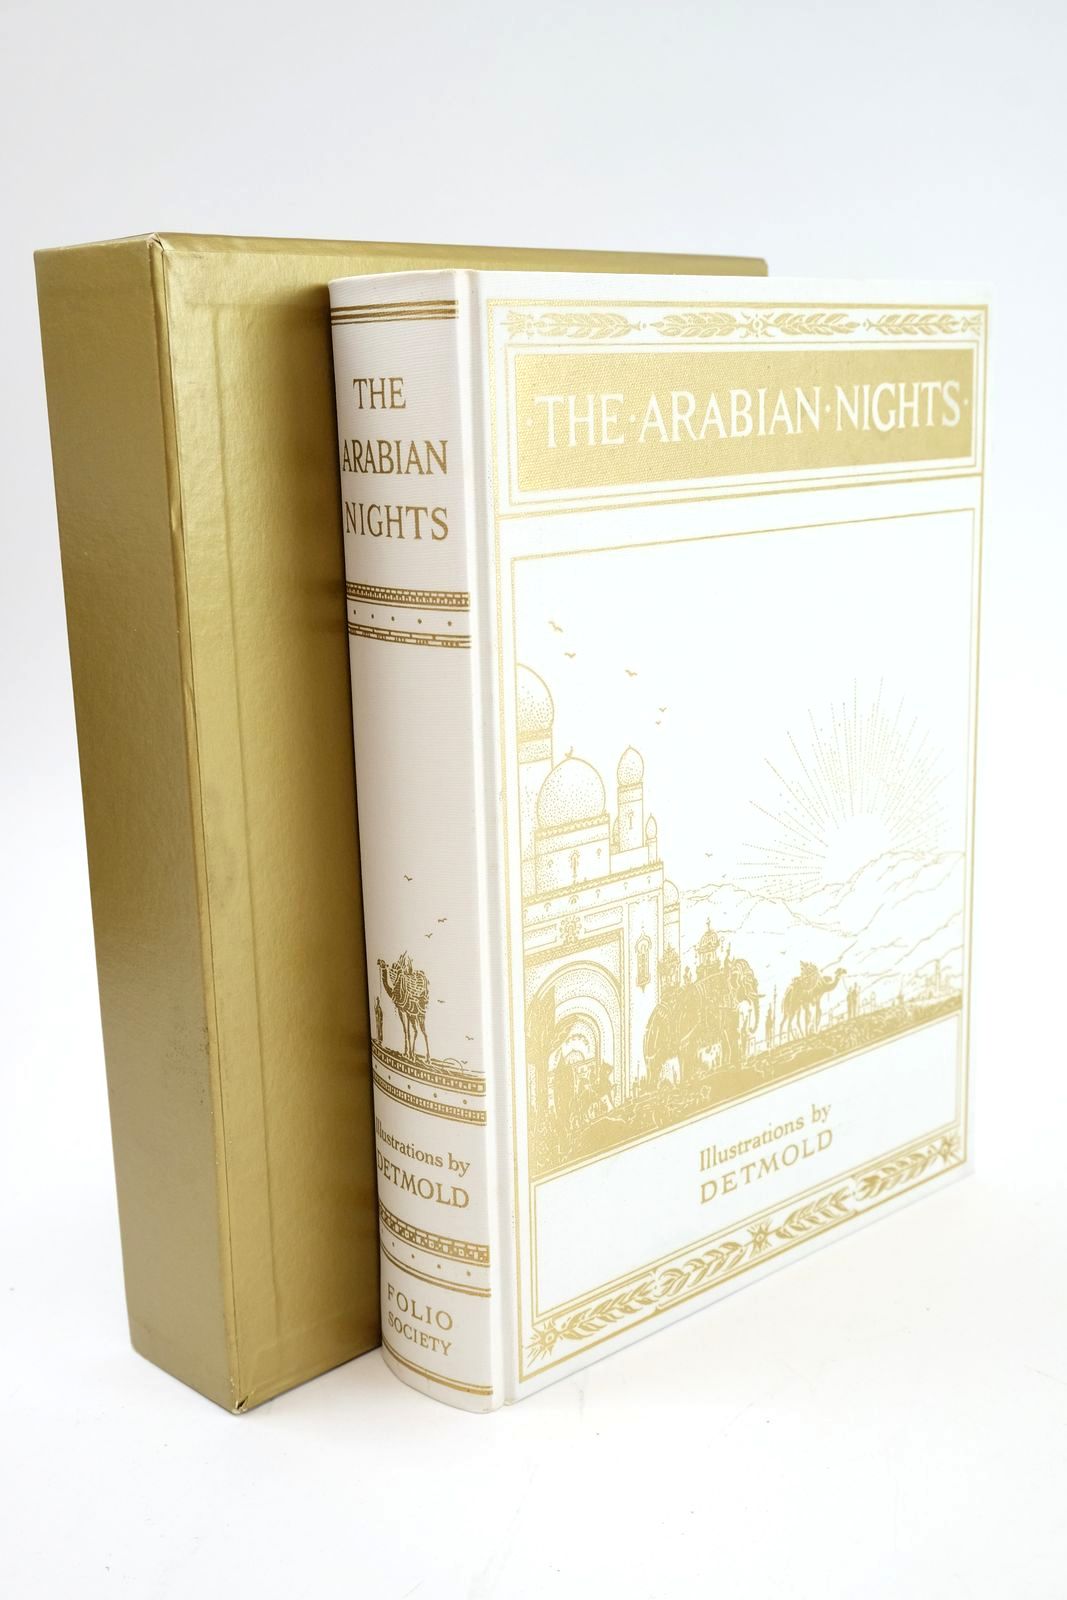 Photo of THE ARABIAN NIGHTS illustrated by Detmold, Edward J. published by Folio Society (STOCK CODE: 1324773)  for sale by Stella & Rose's Books